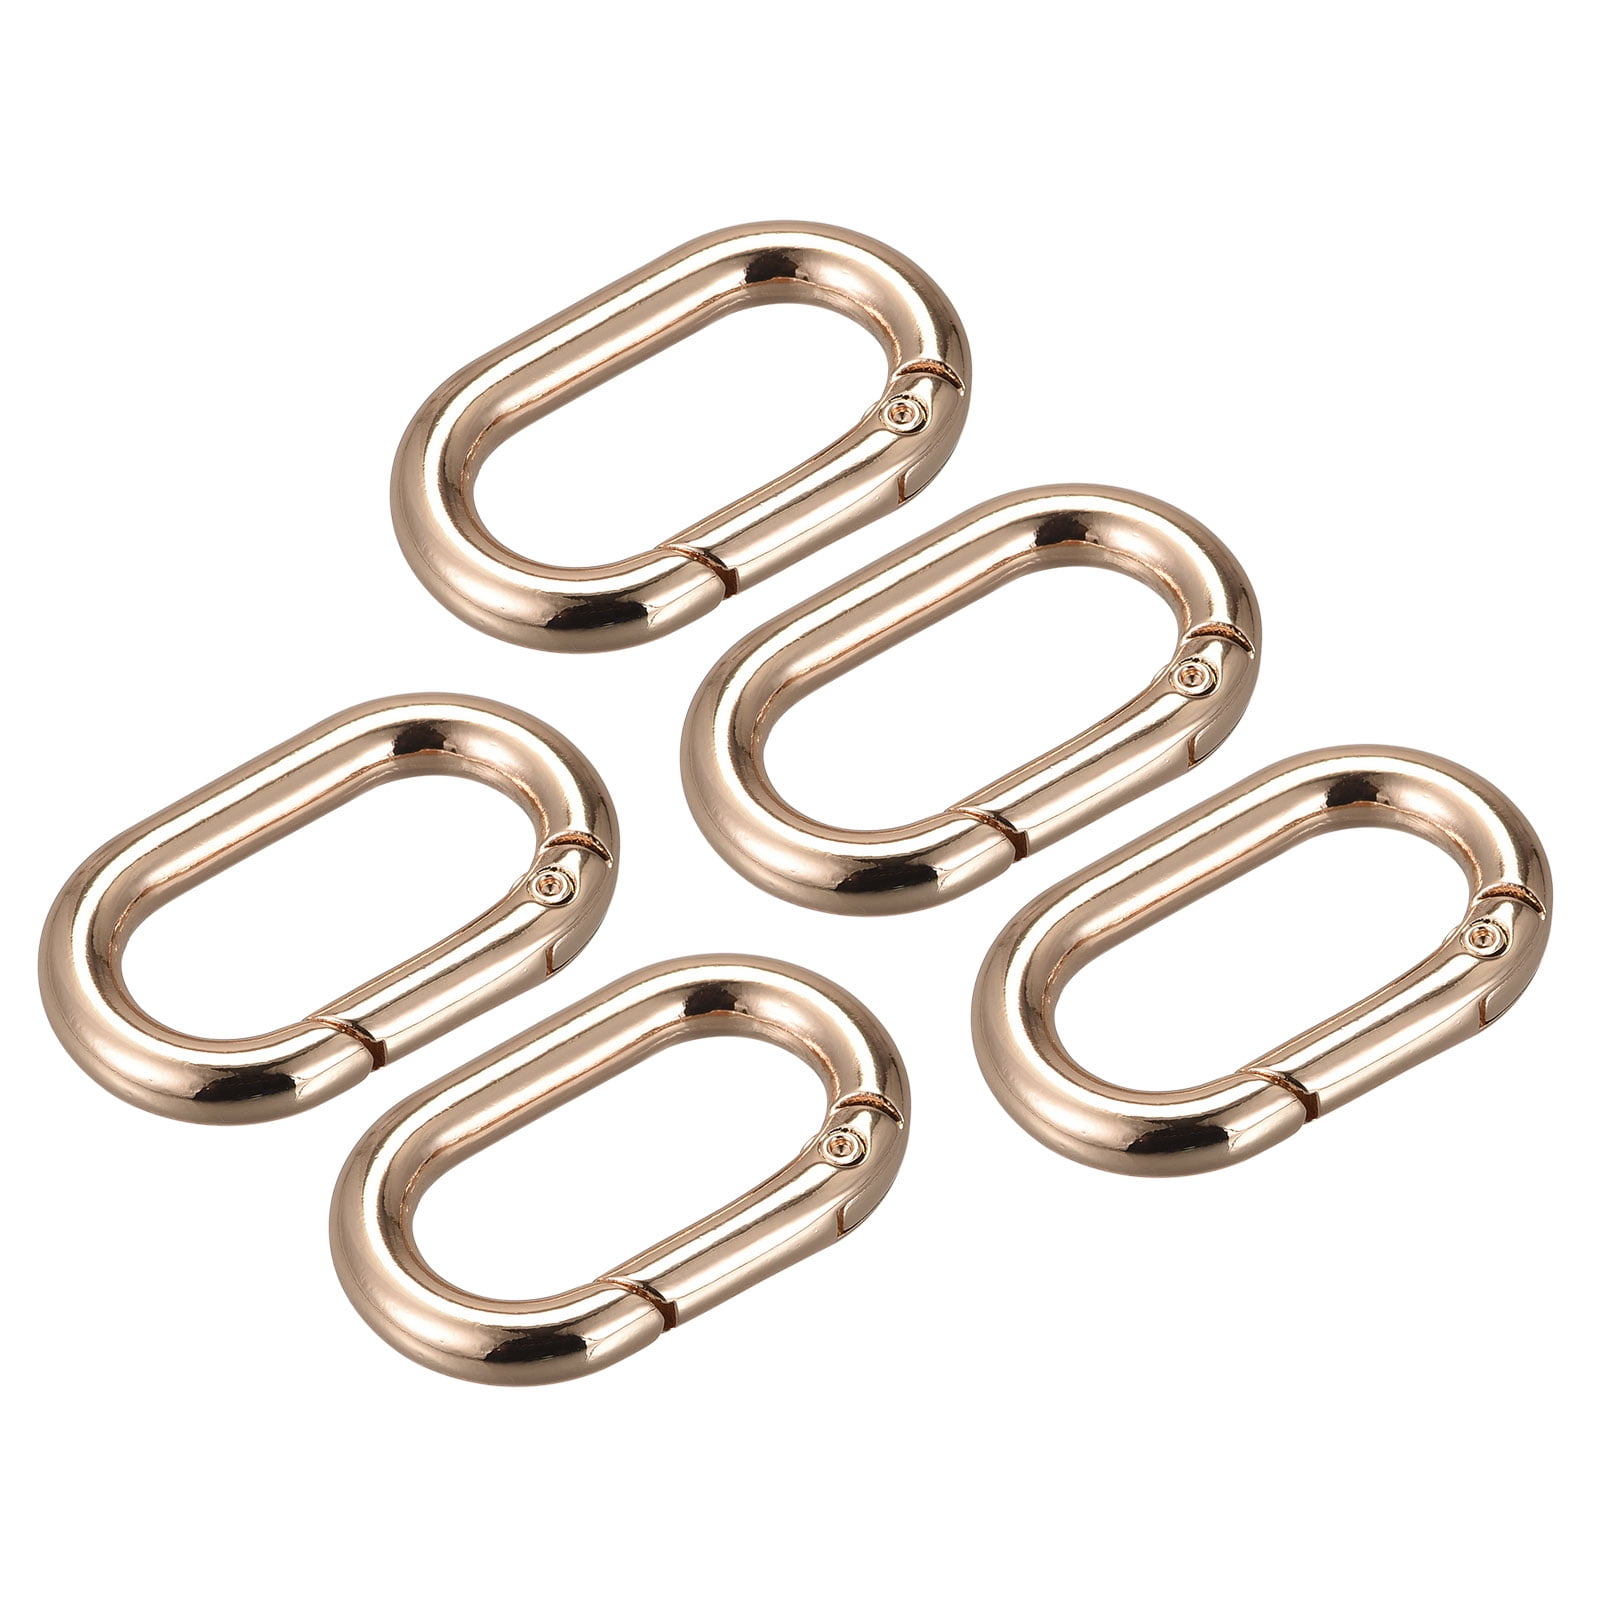 3 inch Solid brass D Oval Spring load Snap Carabiner keychain Hook Clip  Purse